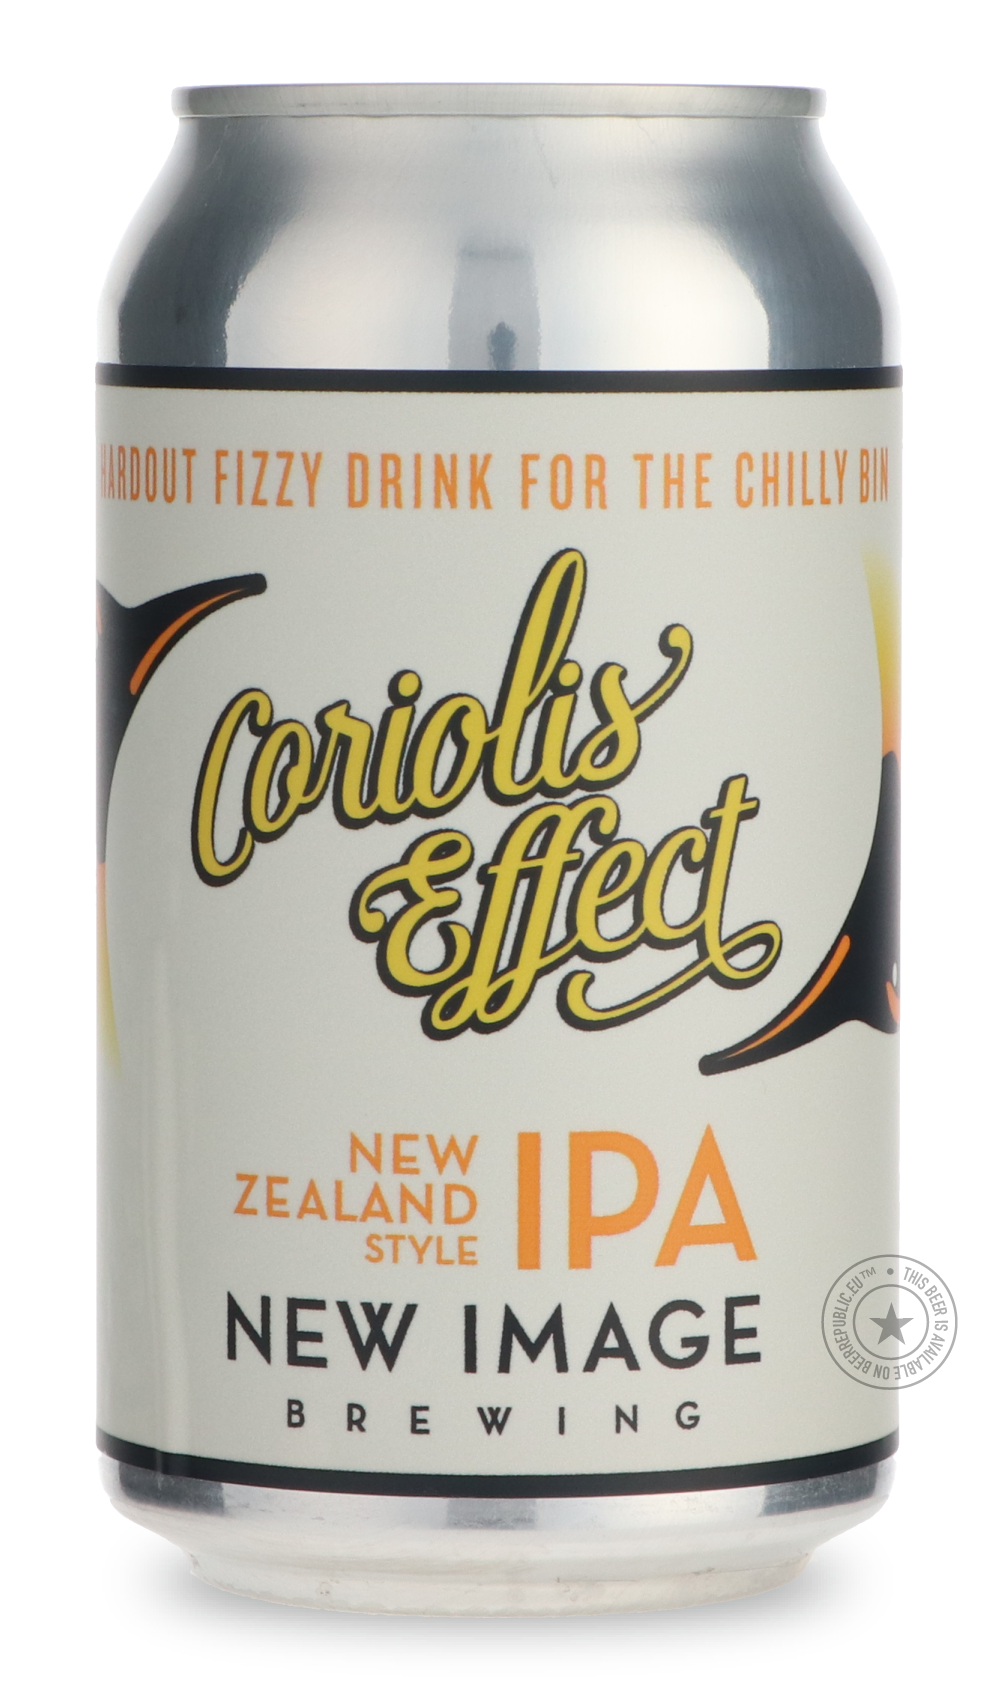 -New Image- Coriolis Effect-IPA- Only @ Beer Republic - The best online beer store for American & Canadian craft beer - Buy beer online from the USA and Canada - Bier online kopen - Amerikaans bier kopen - Craft beer store - Craft beer kopen - Amerikanisch bier kaufen - Bier online kaufen - Acheter biere online - IPA - Stout - Porter - New England IPA - Hazy IPA - Imperial Stout - Barrel Aged - Barrel Aged Imperial Stout - Brown - Dark beer - Blond - Blonde - Pilsner - Lager - Wheat - Weizen - Amber - Barle